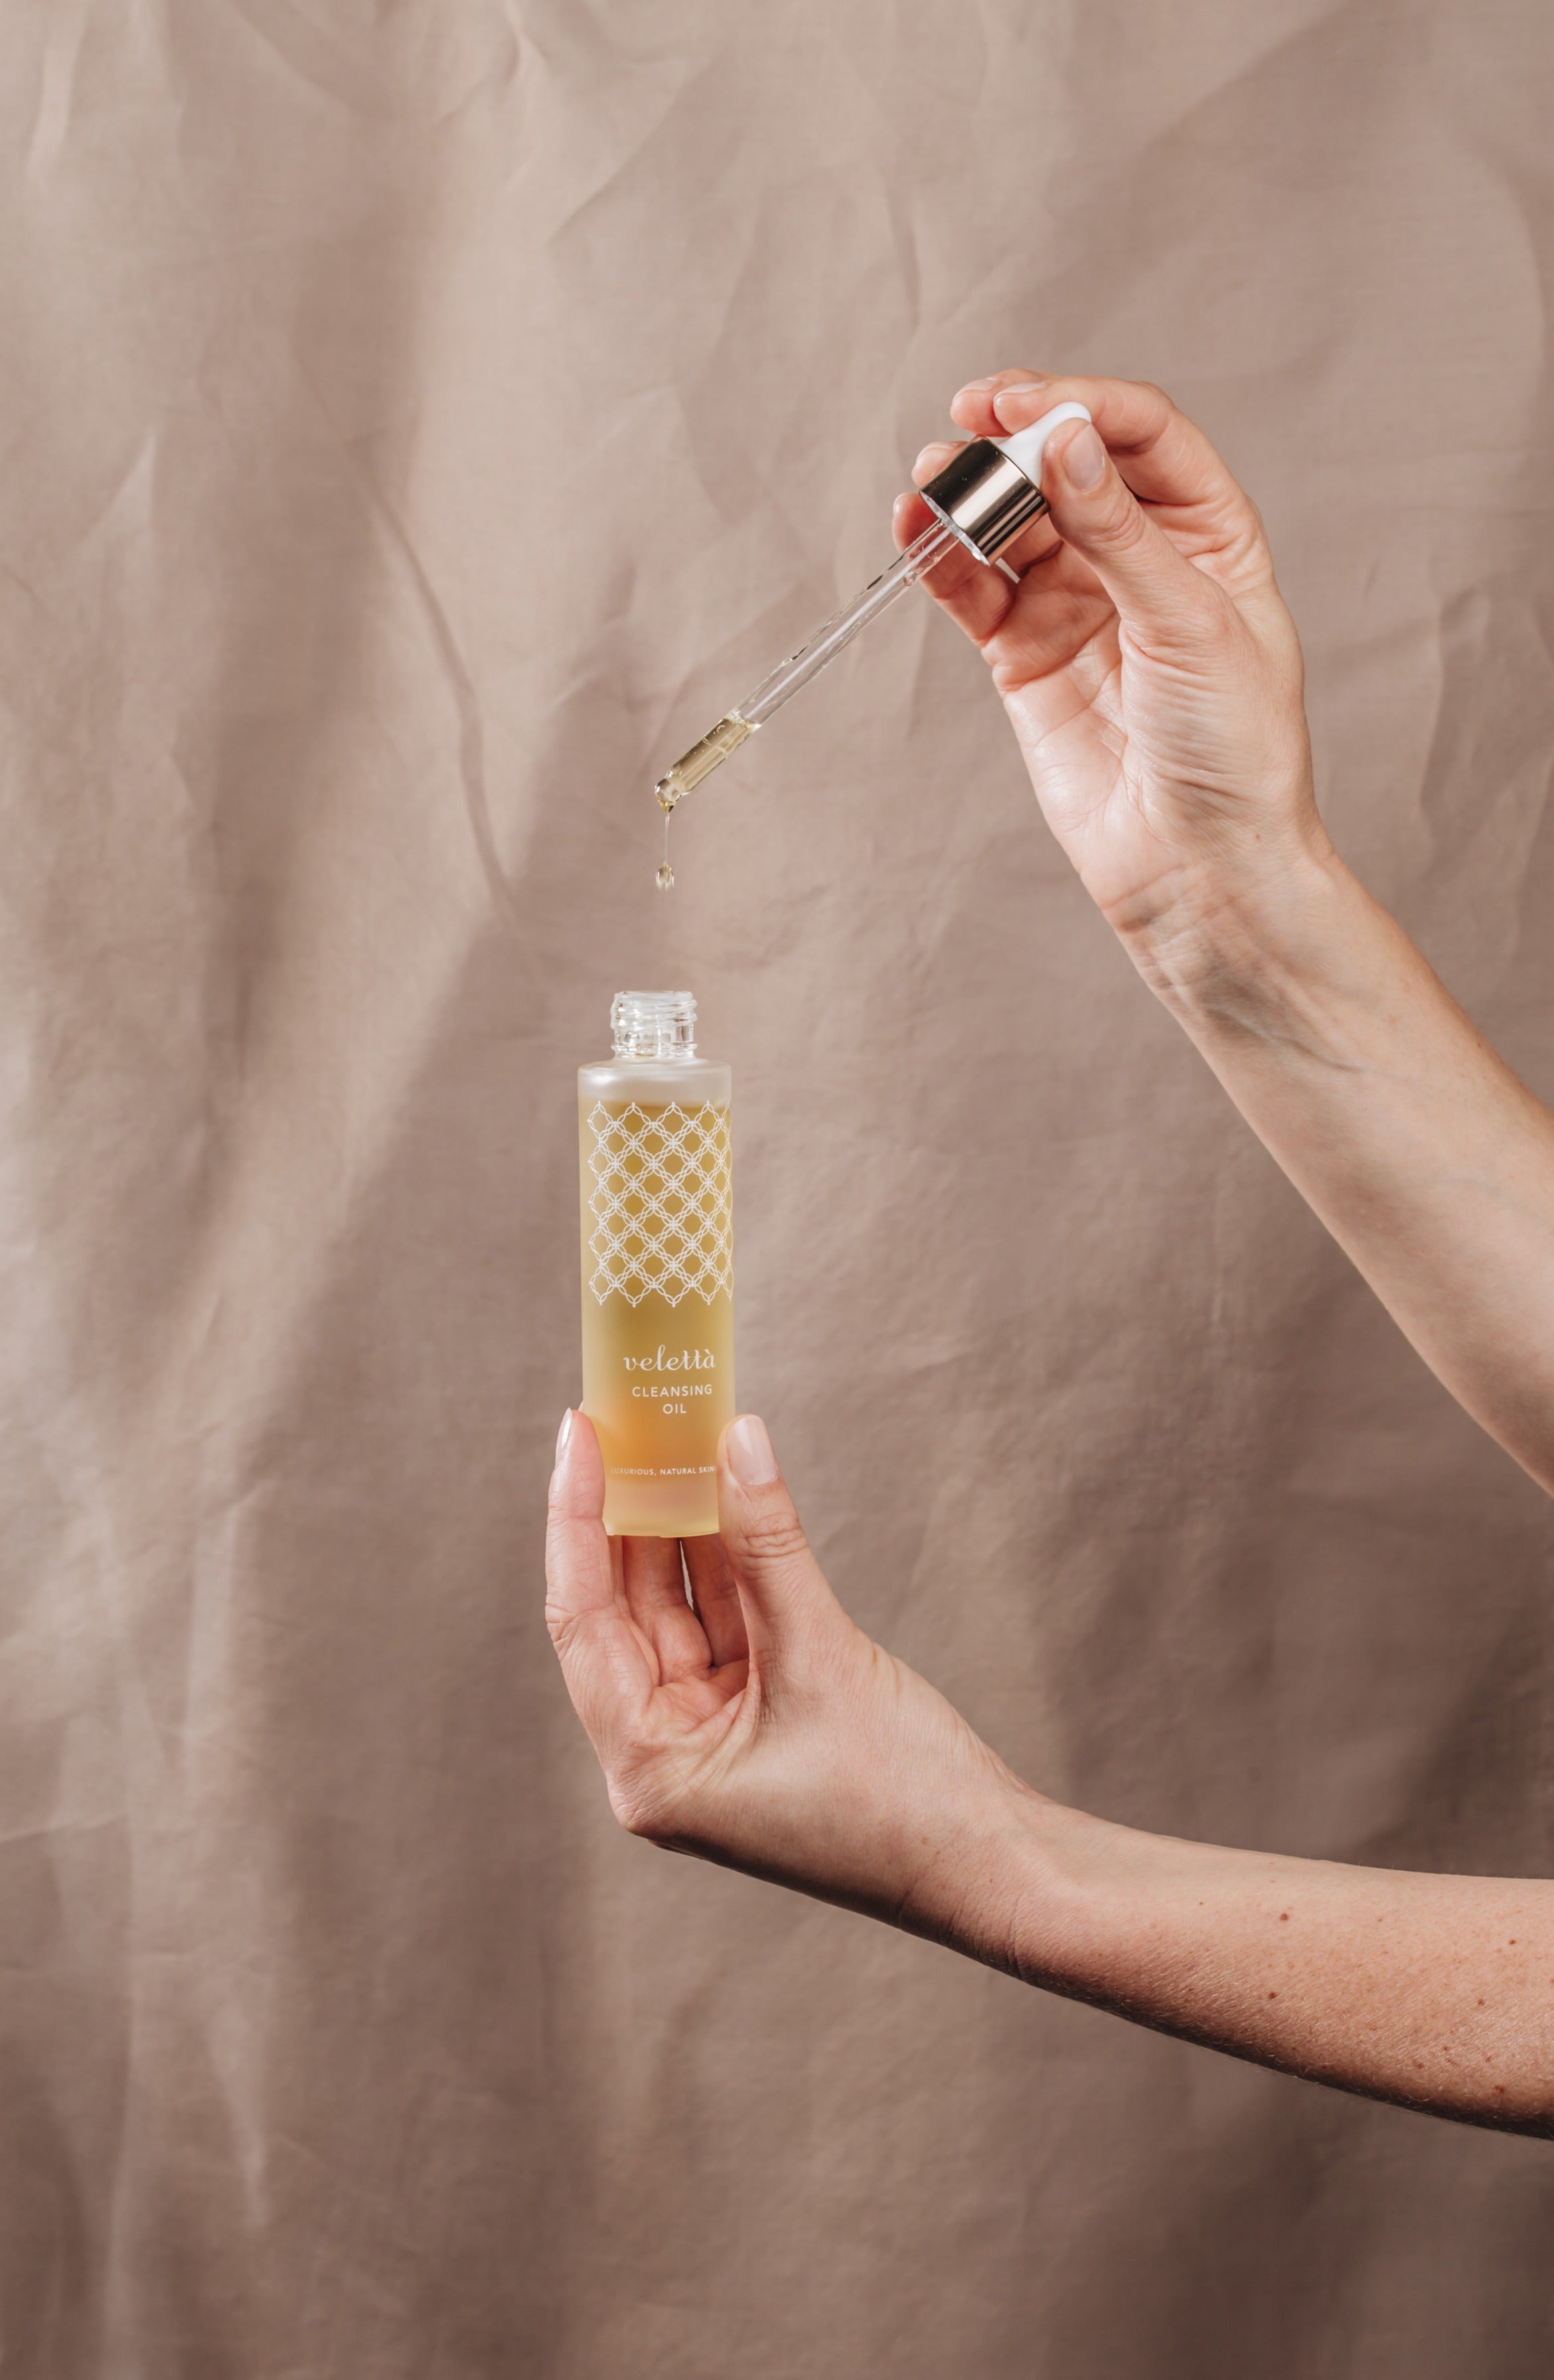 Not using Cleansing Oil? You must, it will make a huge difference to your skin!